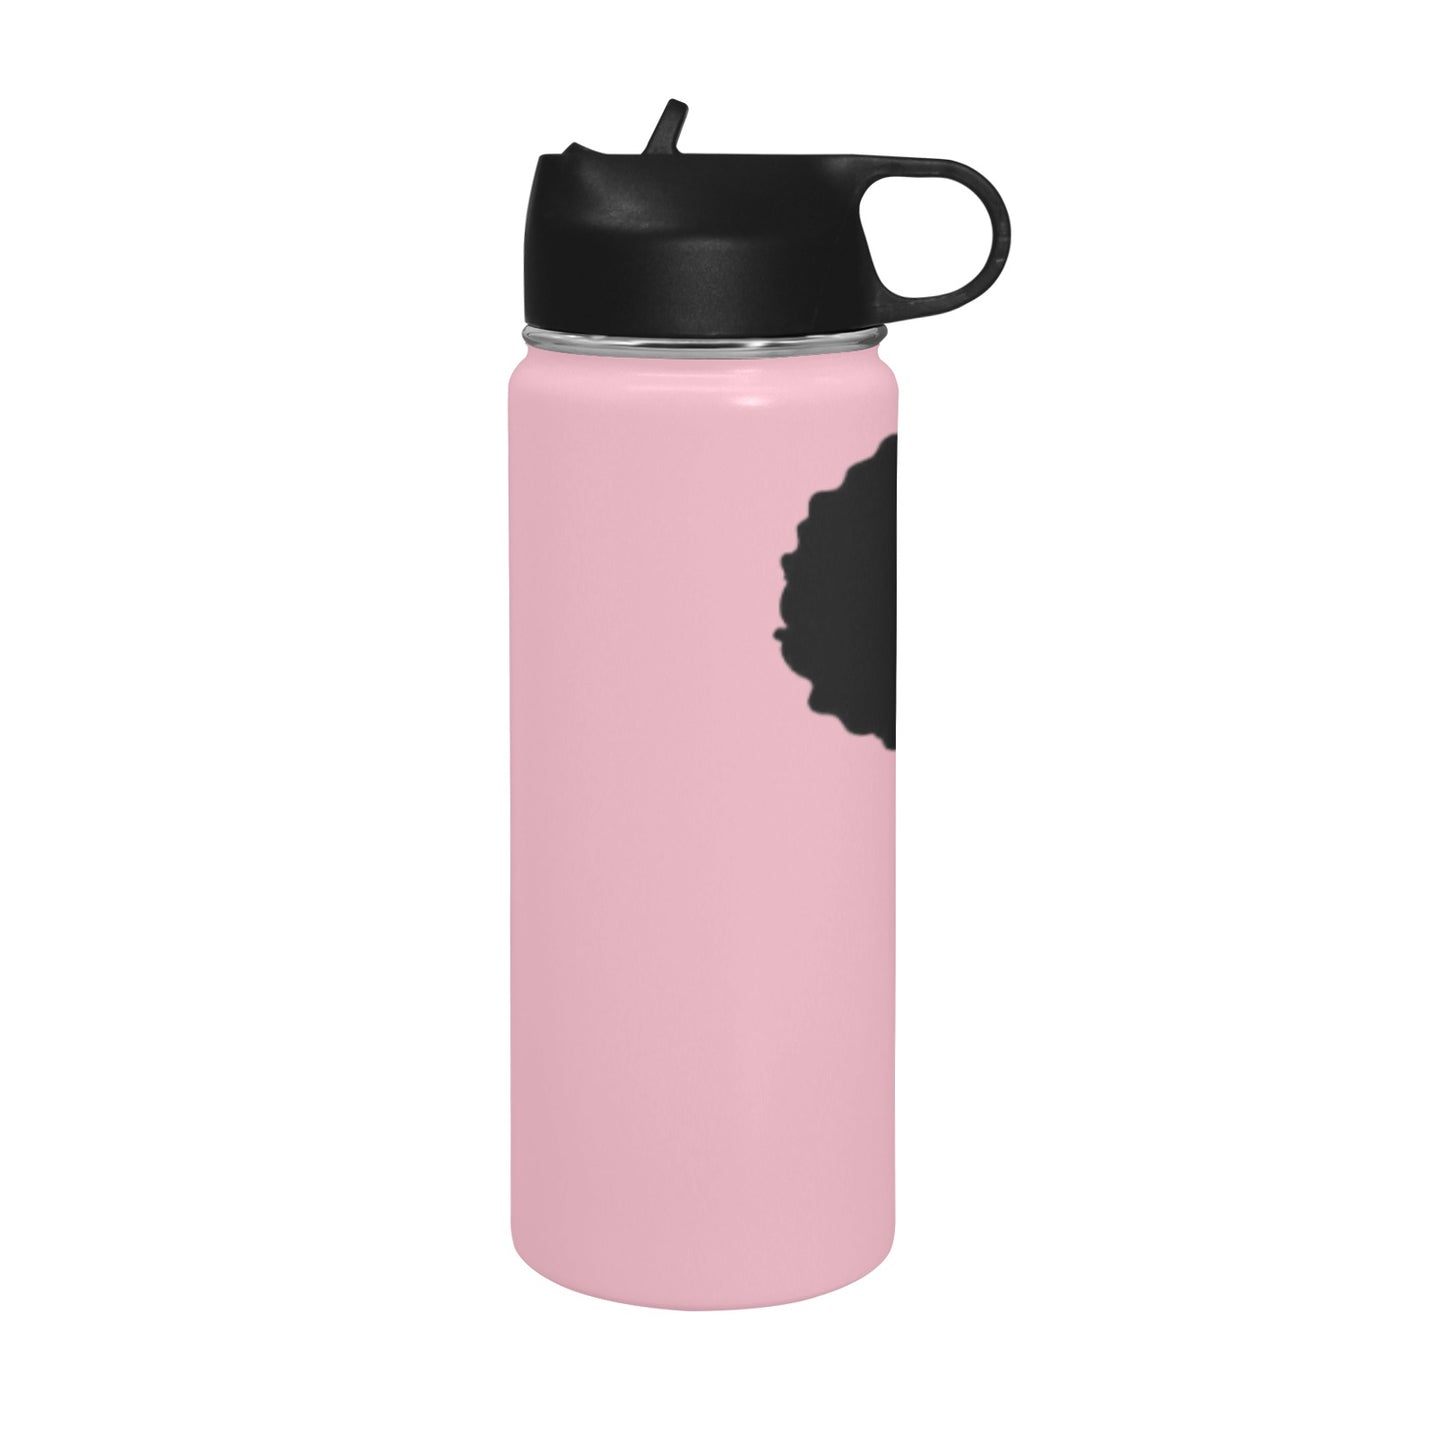 Afro Puff Insulated Water Bottle with Straw Lid (18 oz)